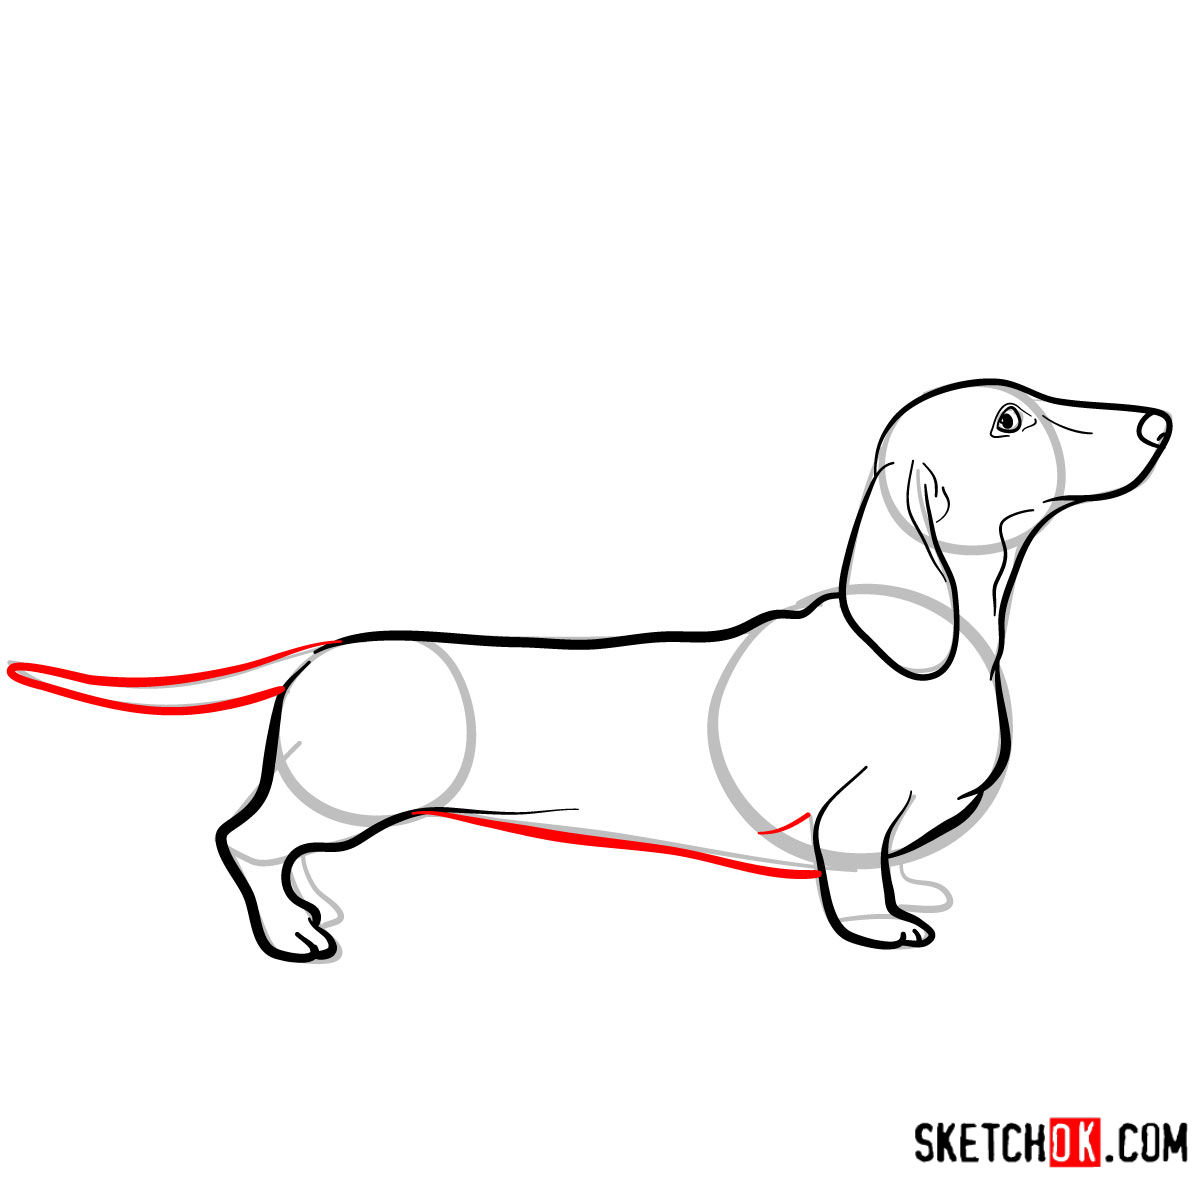 How to draw the Dachshund dog - step 07